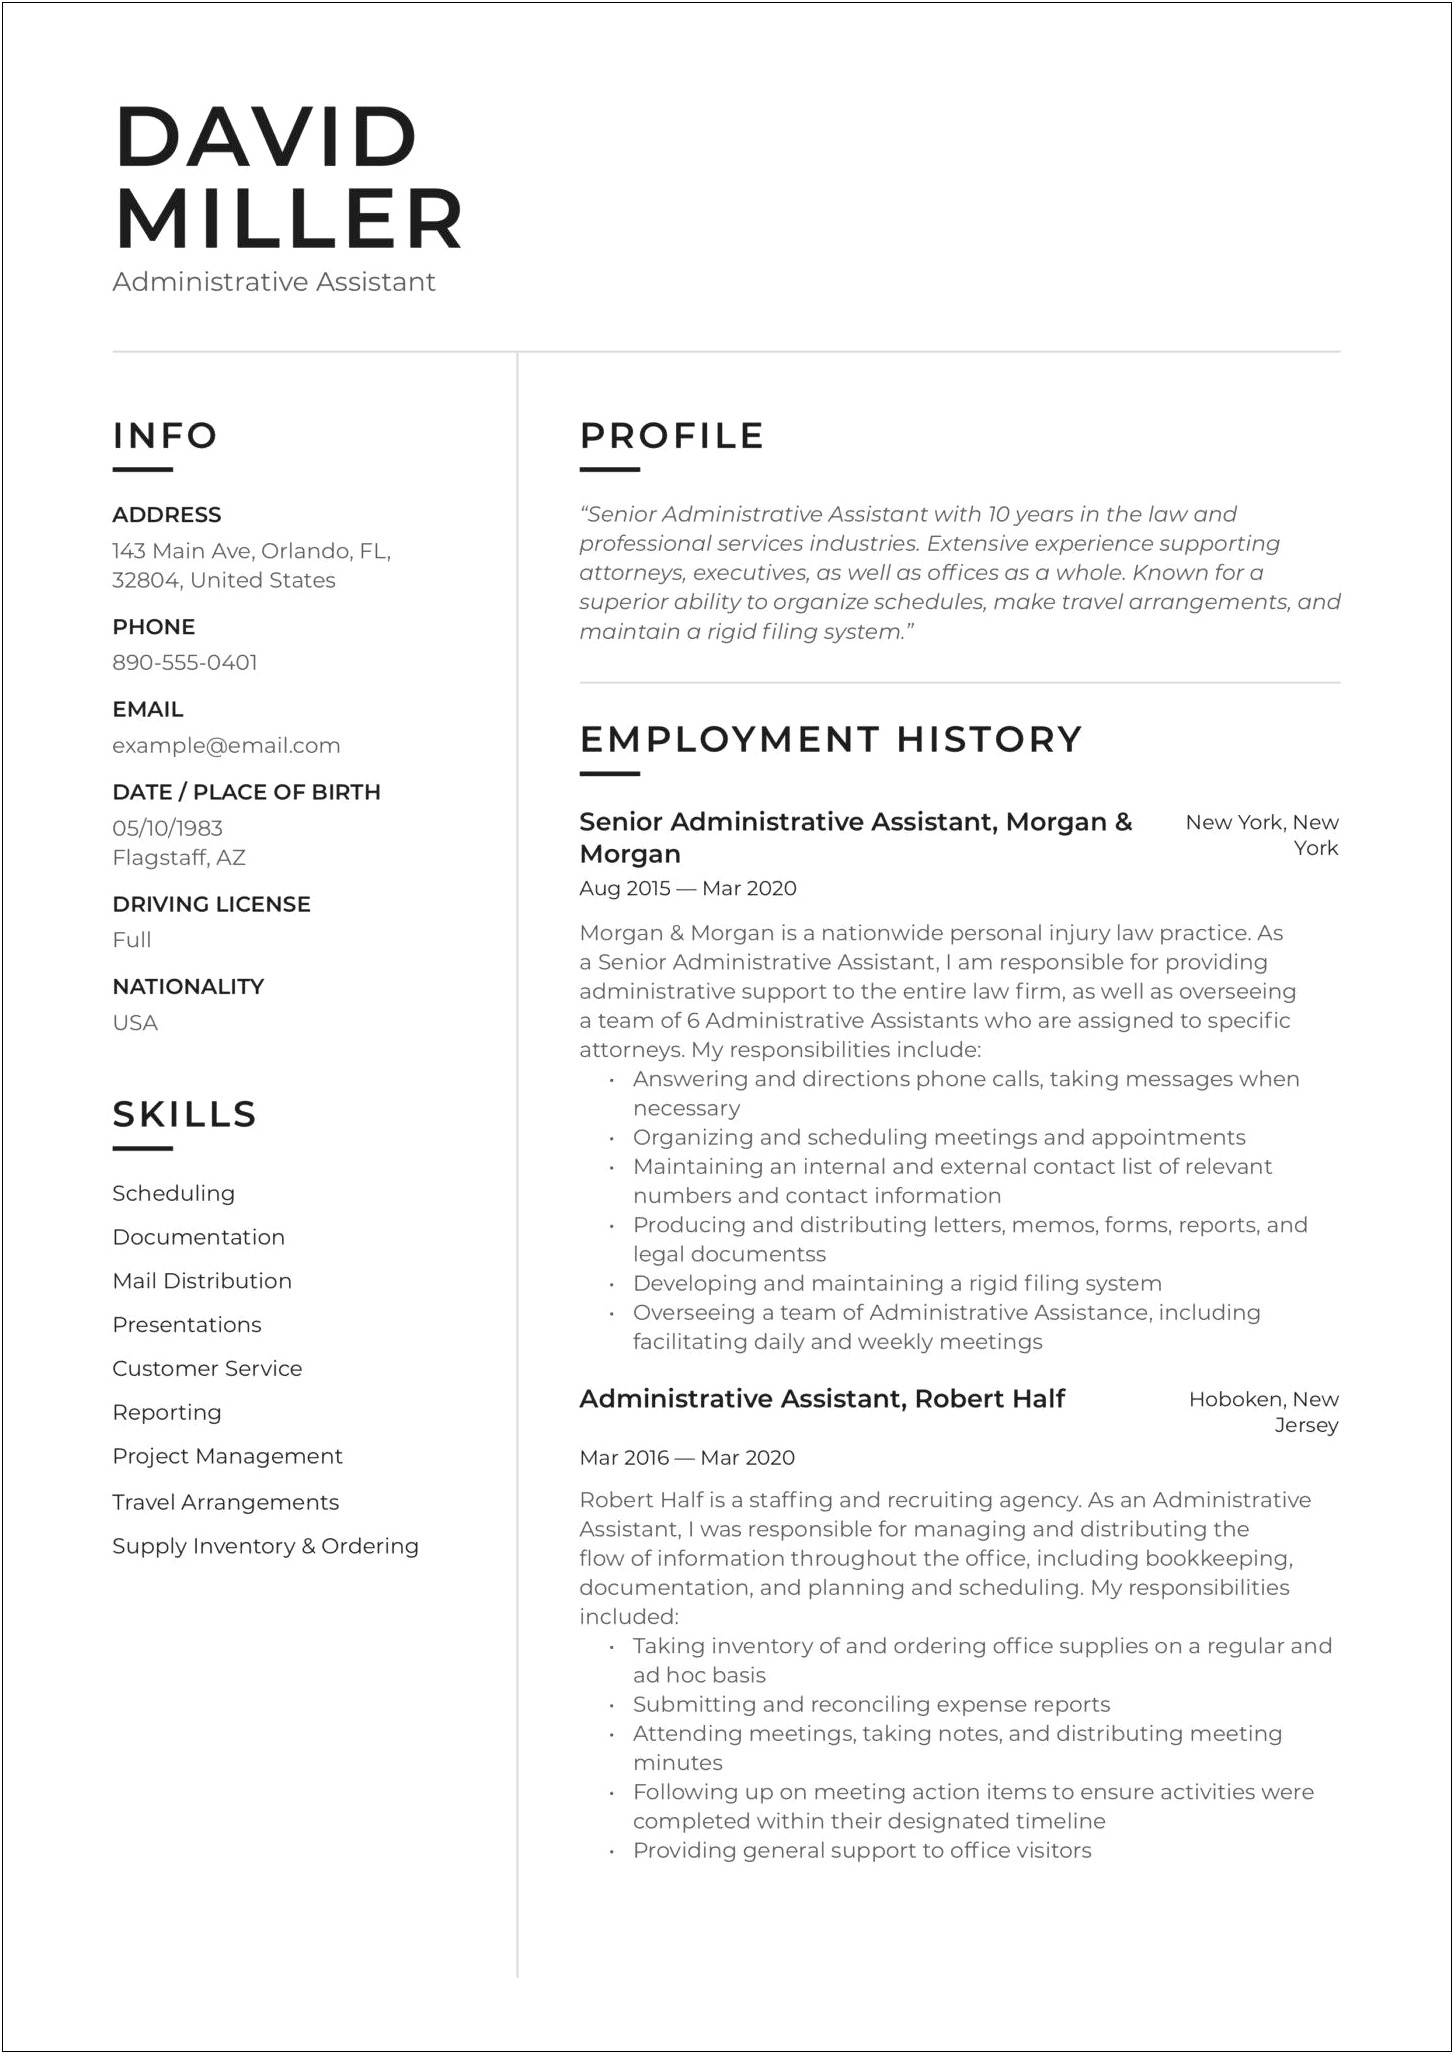 Resume For Administrative Assistant Position With No Experience